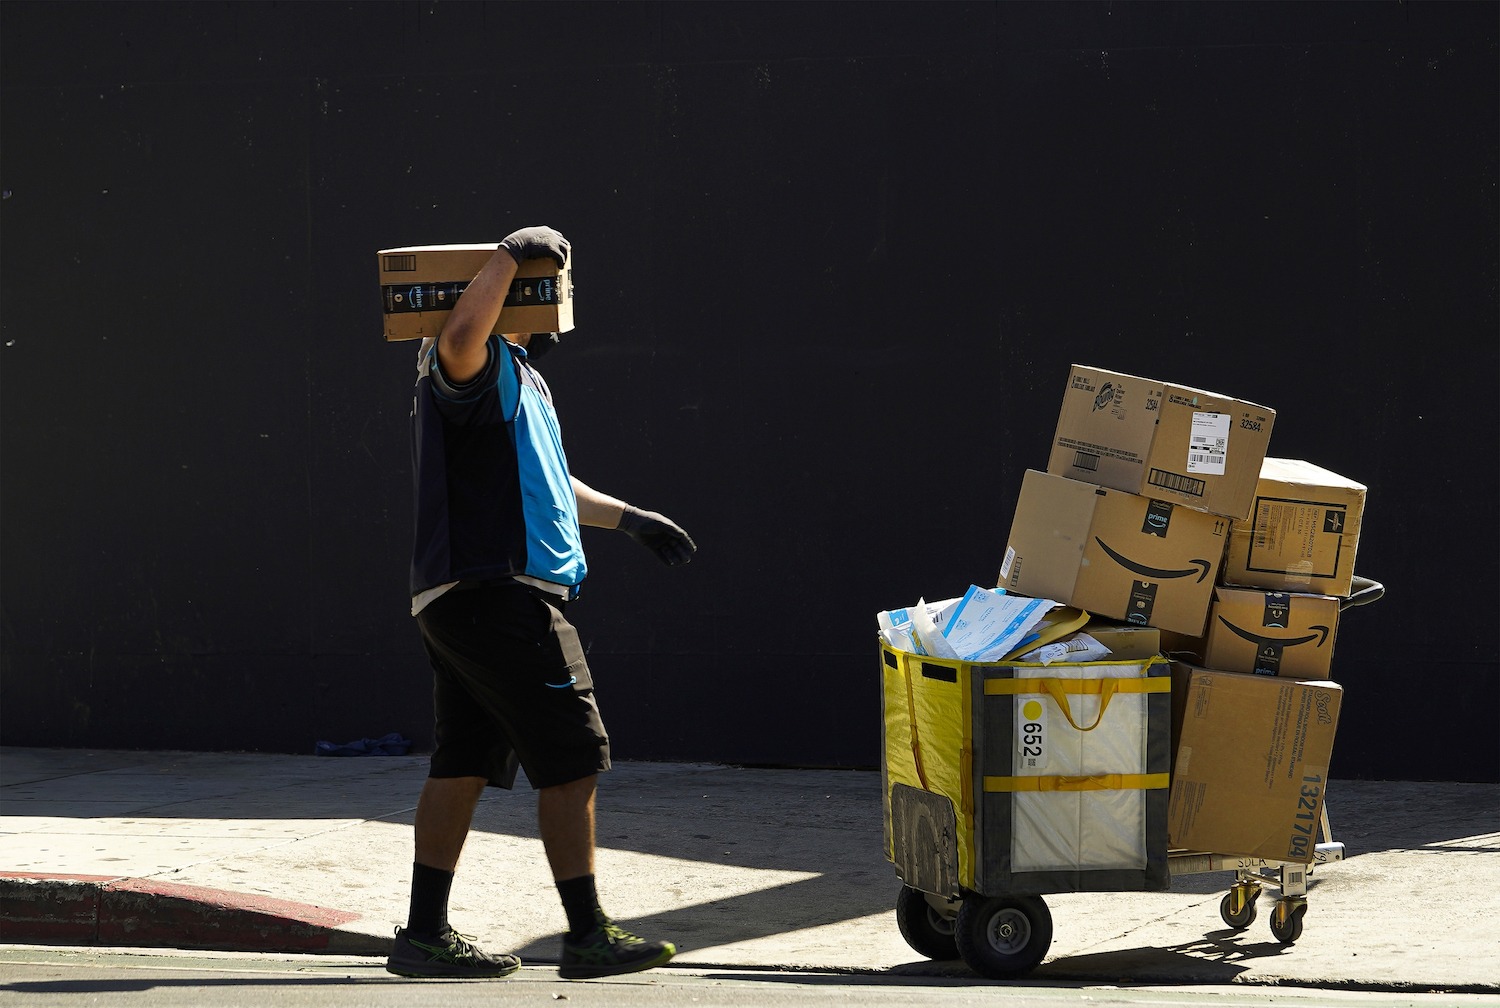 In this Oct. 1, 2020, photo an Amazon worker wears a mask and gloves as he delivers boxes downtown Los Angeles Friday, Oct. 2, 2020. Amazon says that nearly 20,000 of its workers have tested positive or been presumed positive for the virus that causes COVID-19. Amazon says in a corporate blog Thursday that it examined data from March 1 to Sept. 19 for its 1.37 million workers at Amazon and Whole Foods Market. It said that it compared COVID-19 case rates to the general population, as reported by Johns Hopkins University for the same period. Based on that analysis, if the rate among Amazon and Whole Foods employees were the same as it is for the general population rate, it estimated it would have seen 33,952 cases among its workforce.